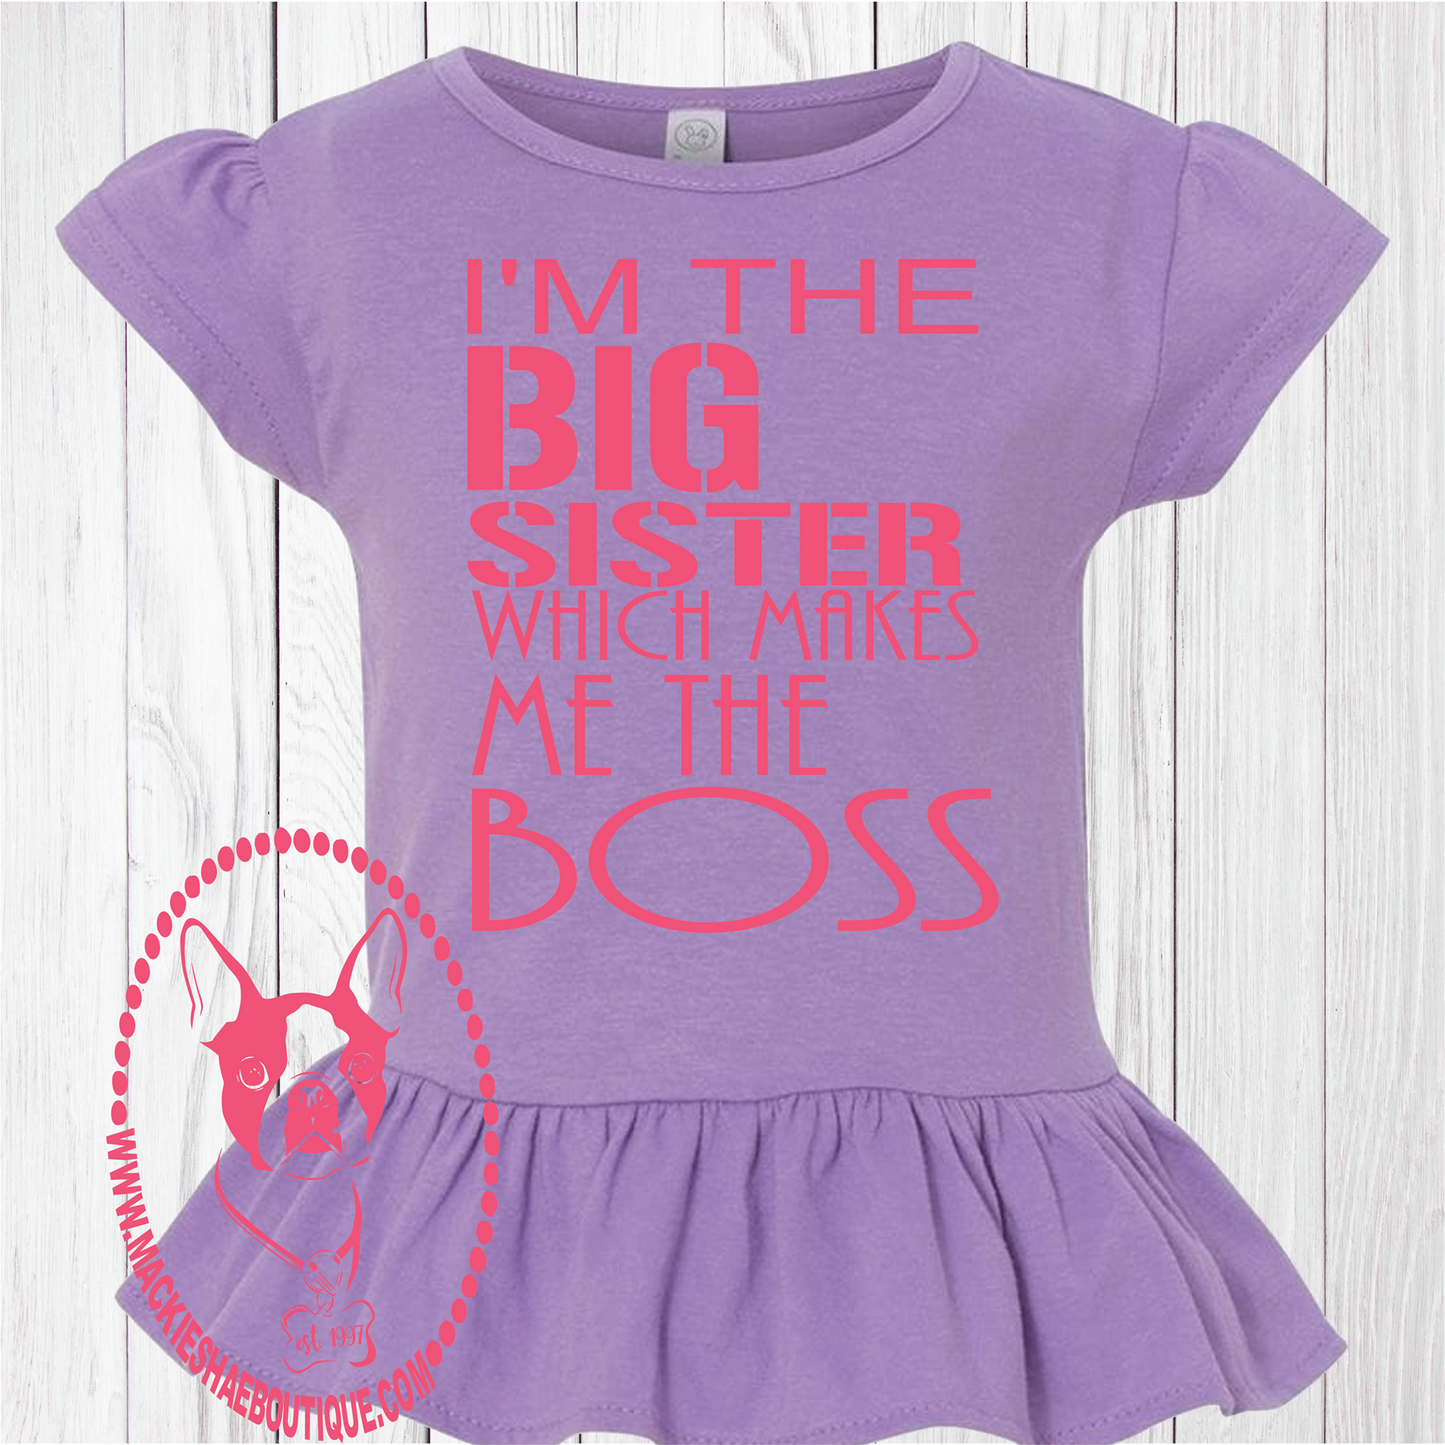 I'm the Big Sister Which Makes Me The Boss Custom Ruffle Shirt for Kids, Short Sleeve